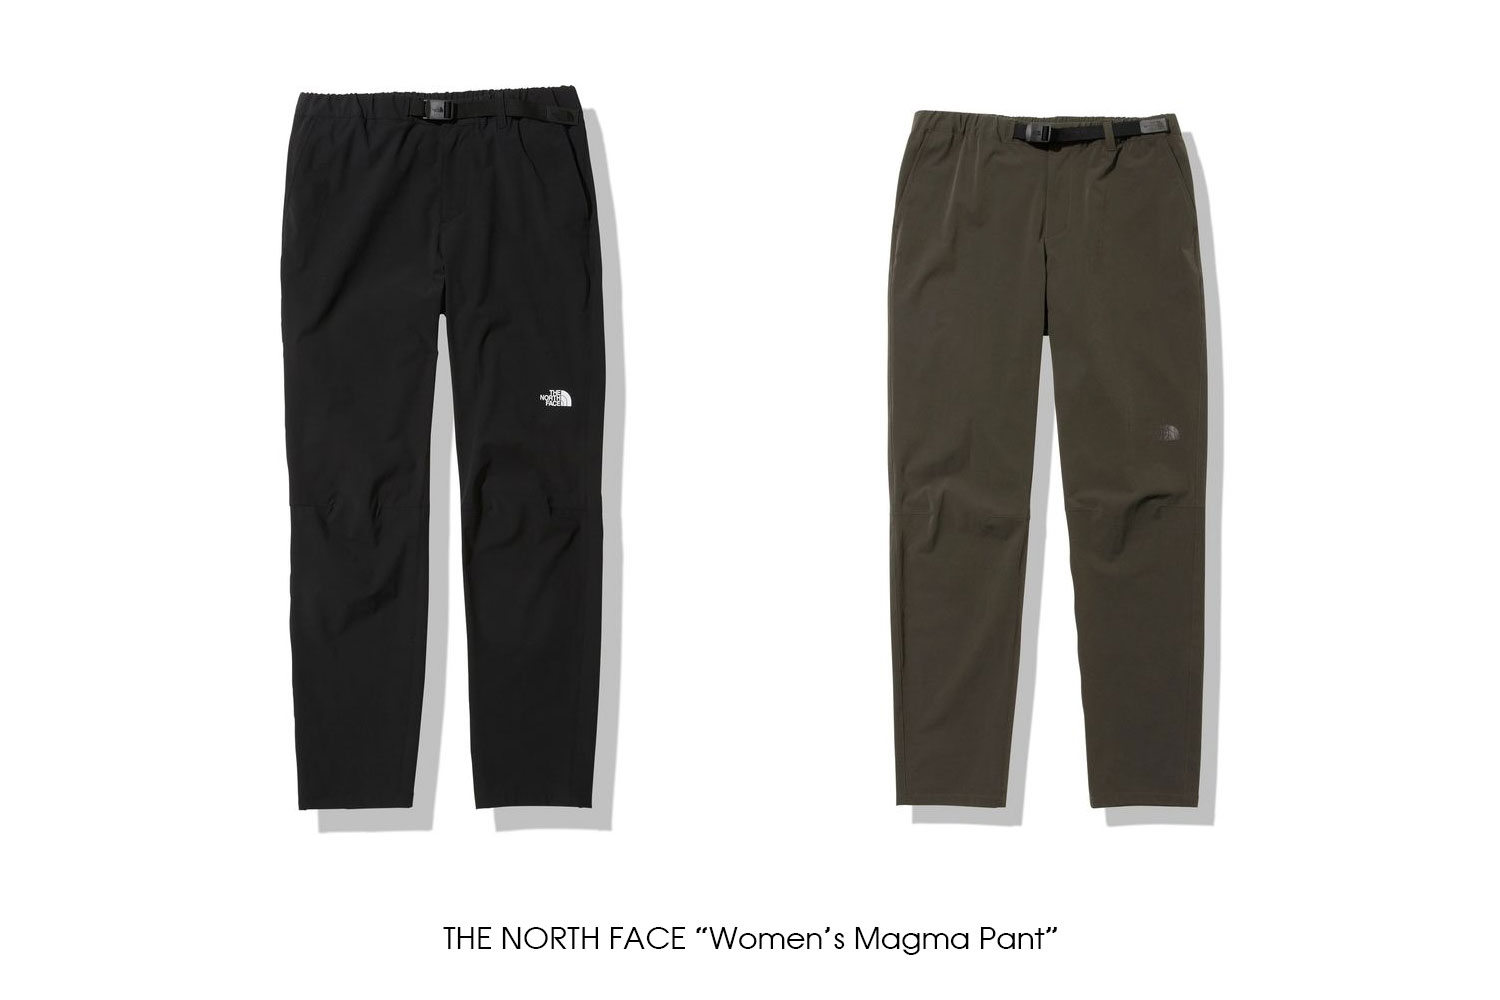 THE NORTH FACE "Women's Magma Pant"